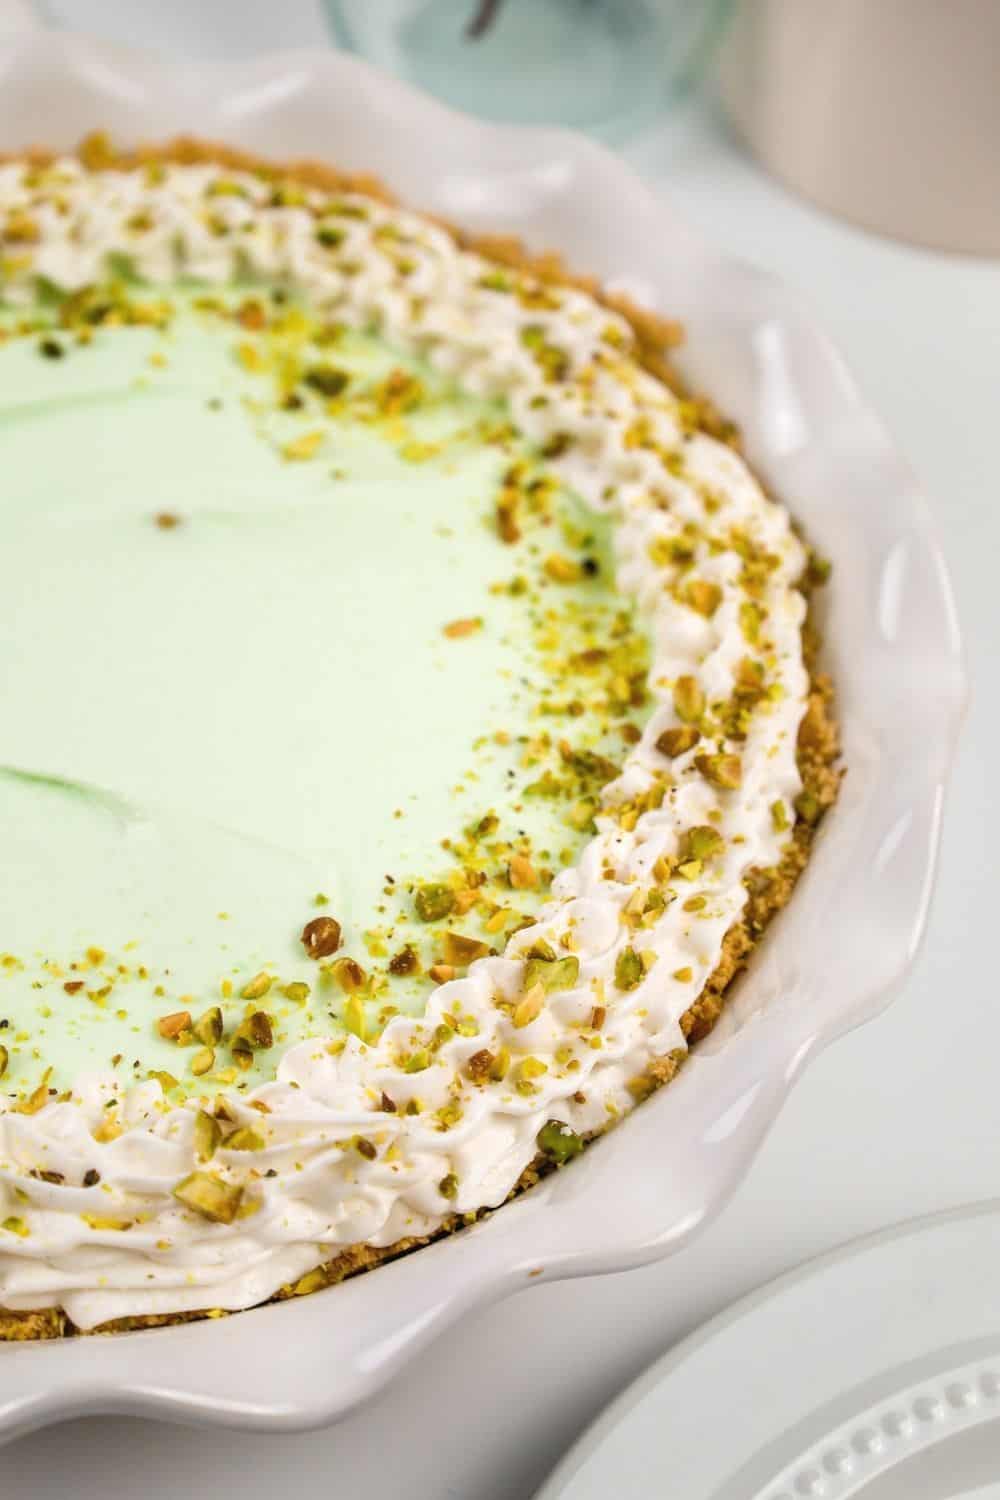 close-up view of the edge of the pie, with whipped cream piped around the edge and finely chopped pistachios sprinkled as a garnish